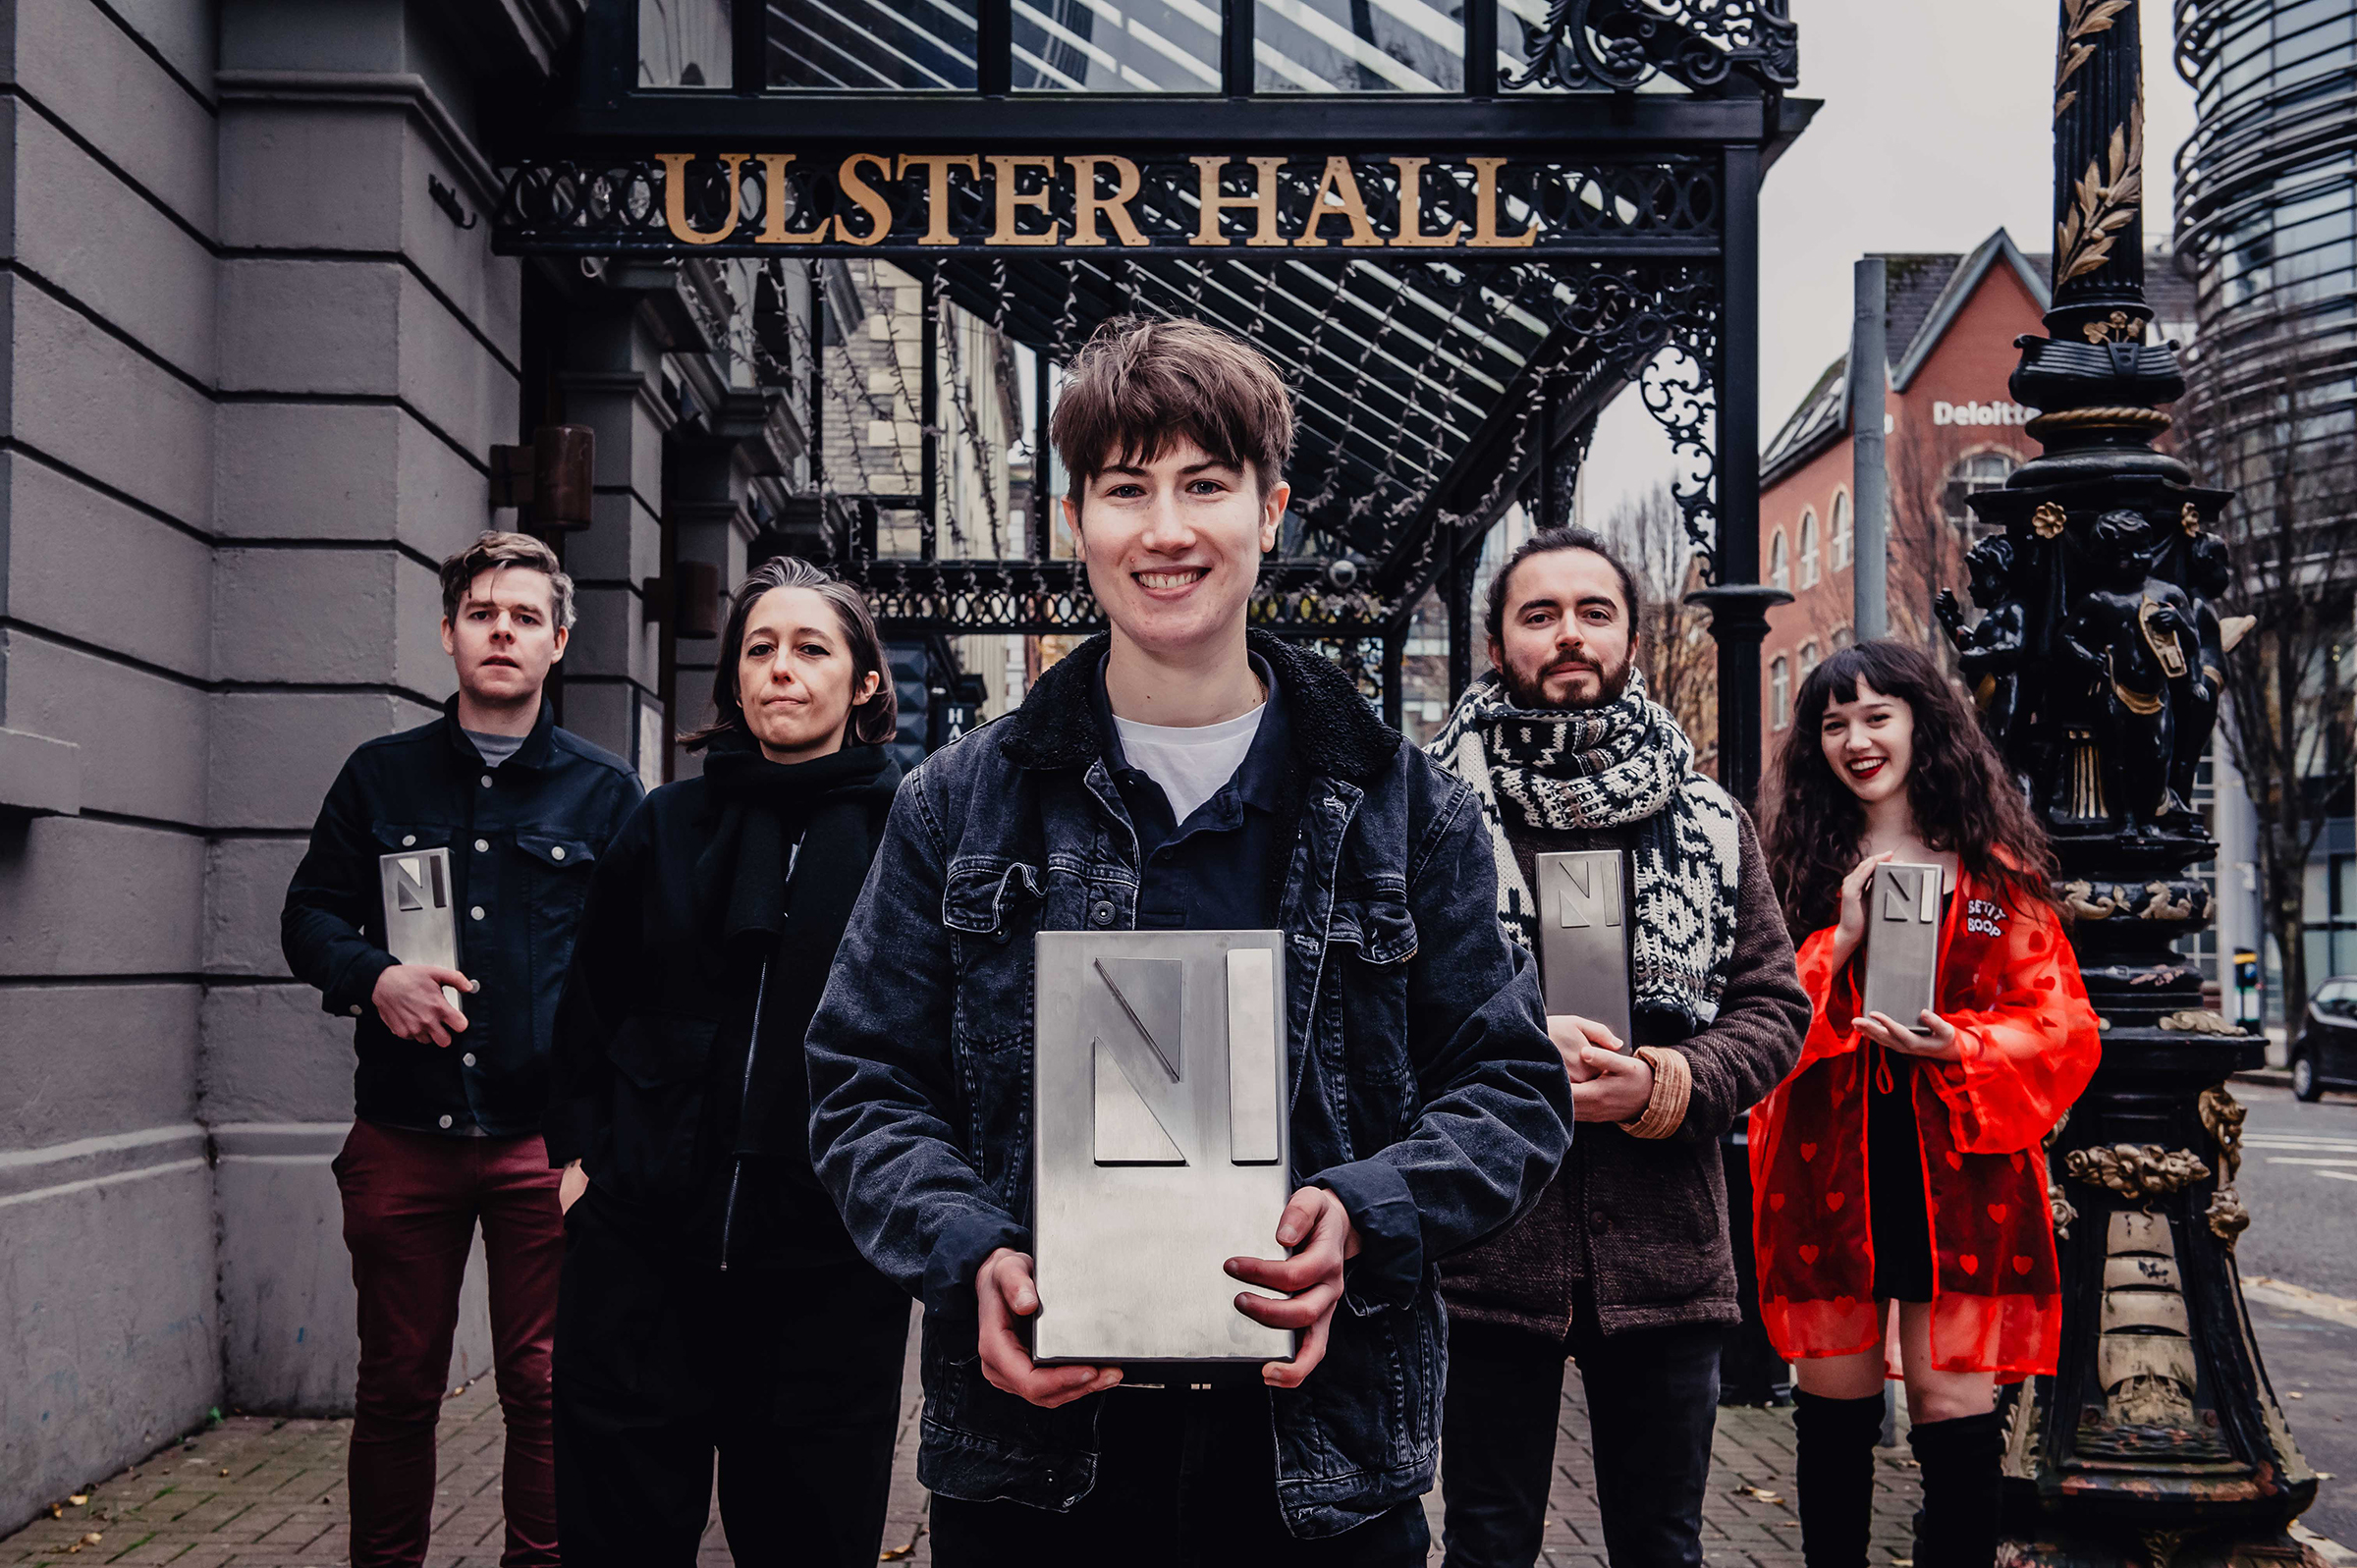 NI MUSIC PRIZE 2020 Winners And Their Awards 